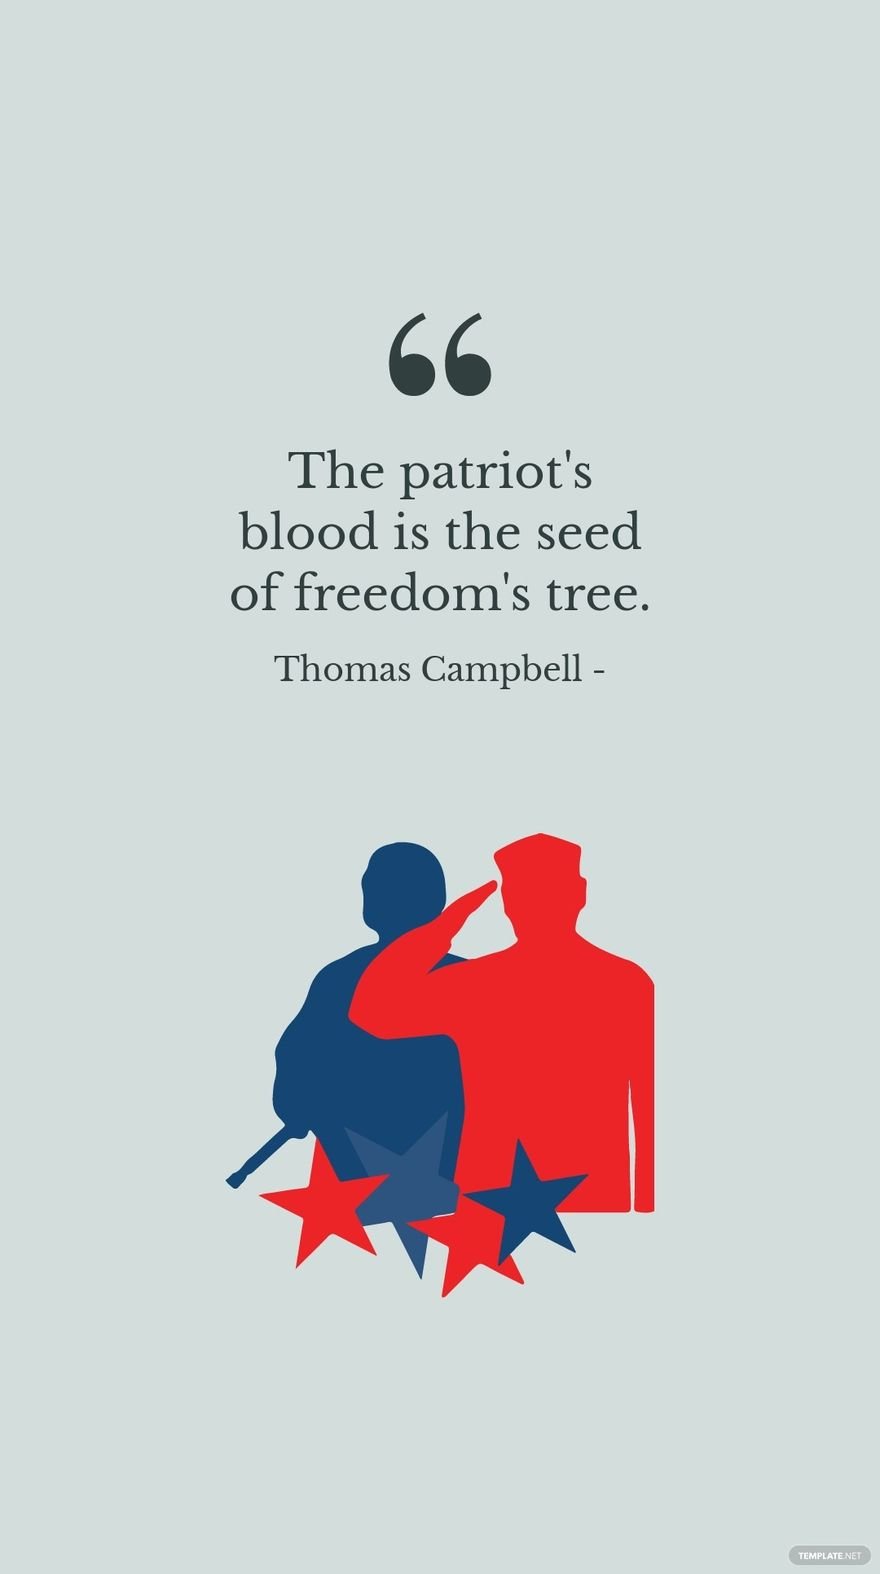 Thomas Campbell - The patriot's blood is the seed of freedom's tree.